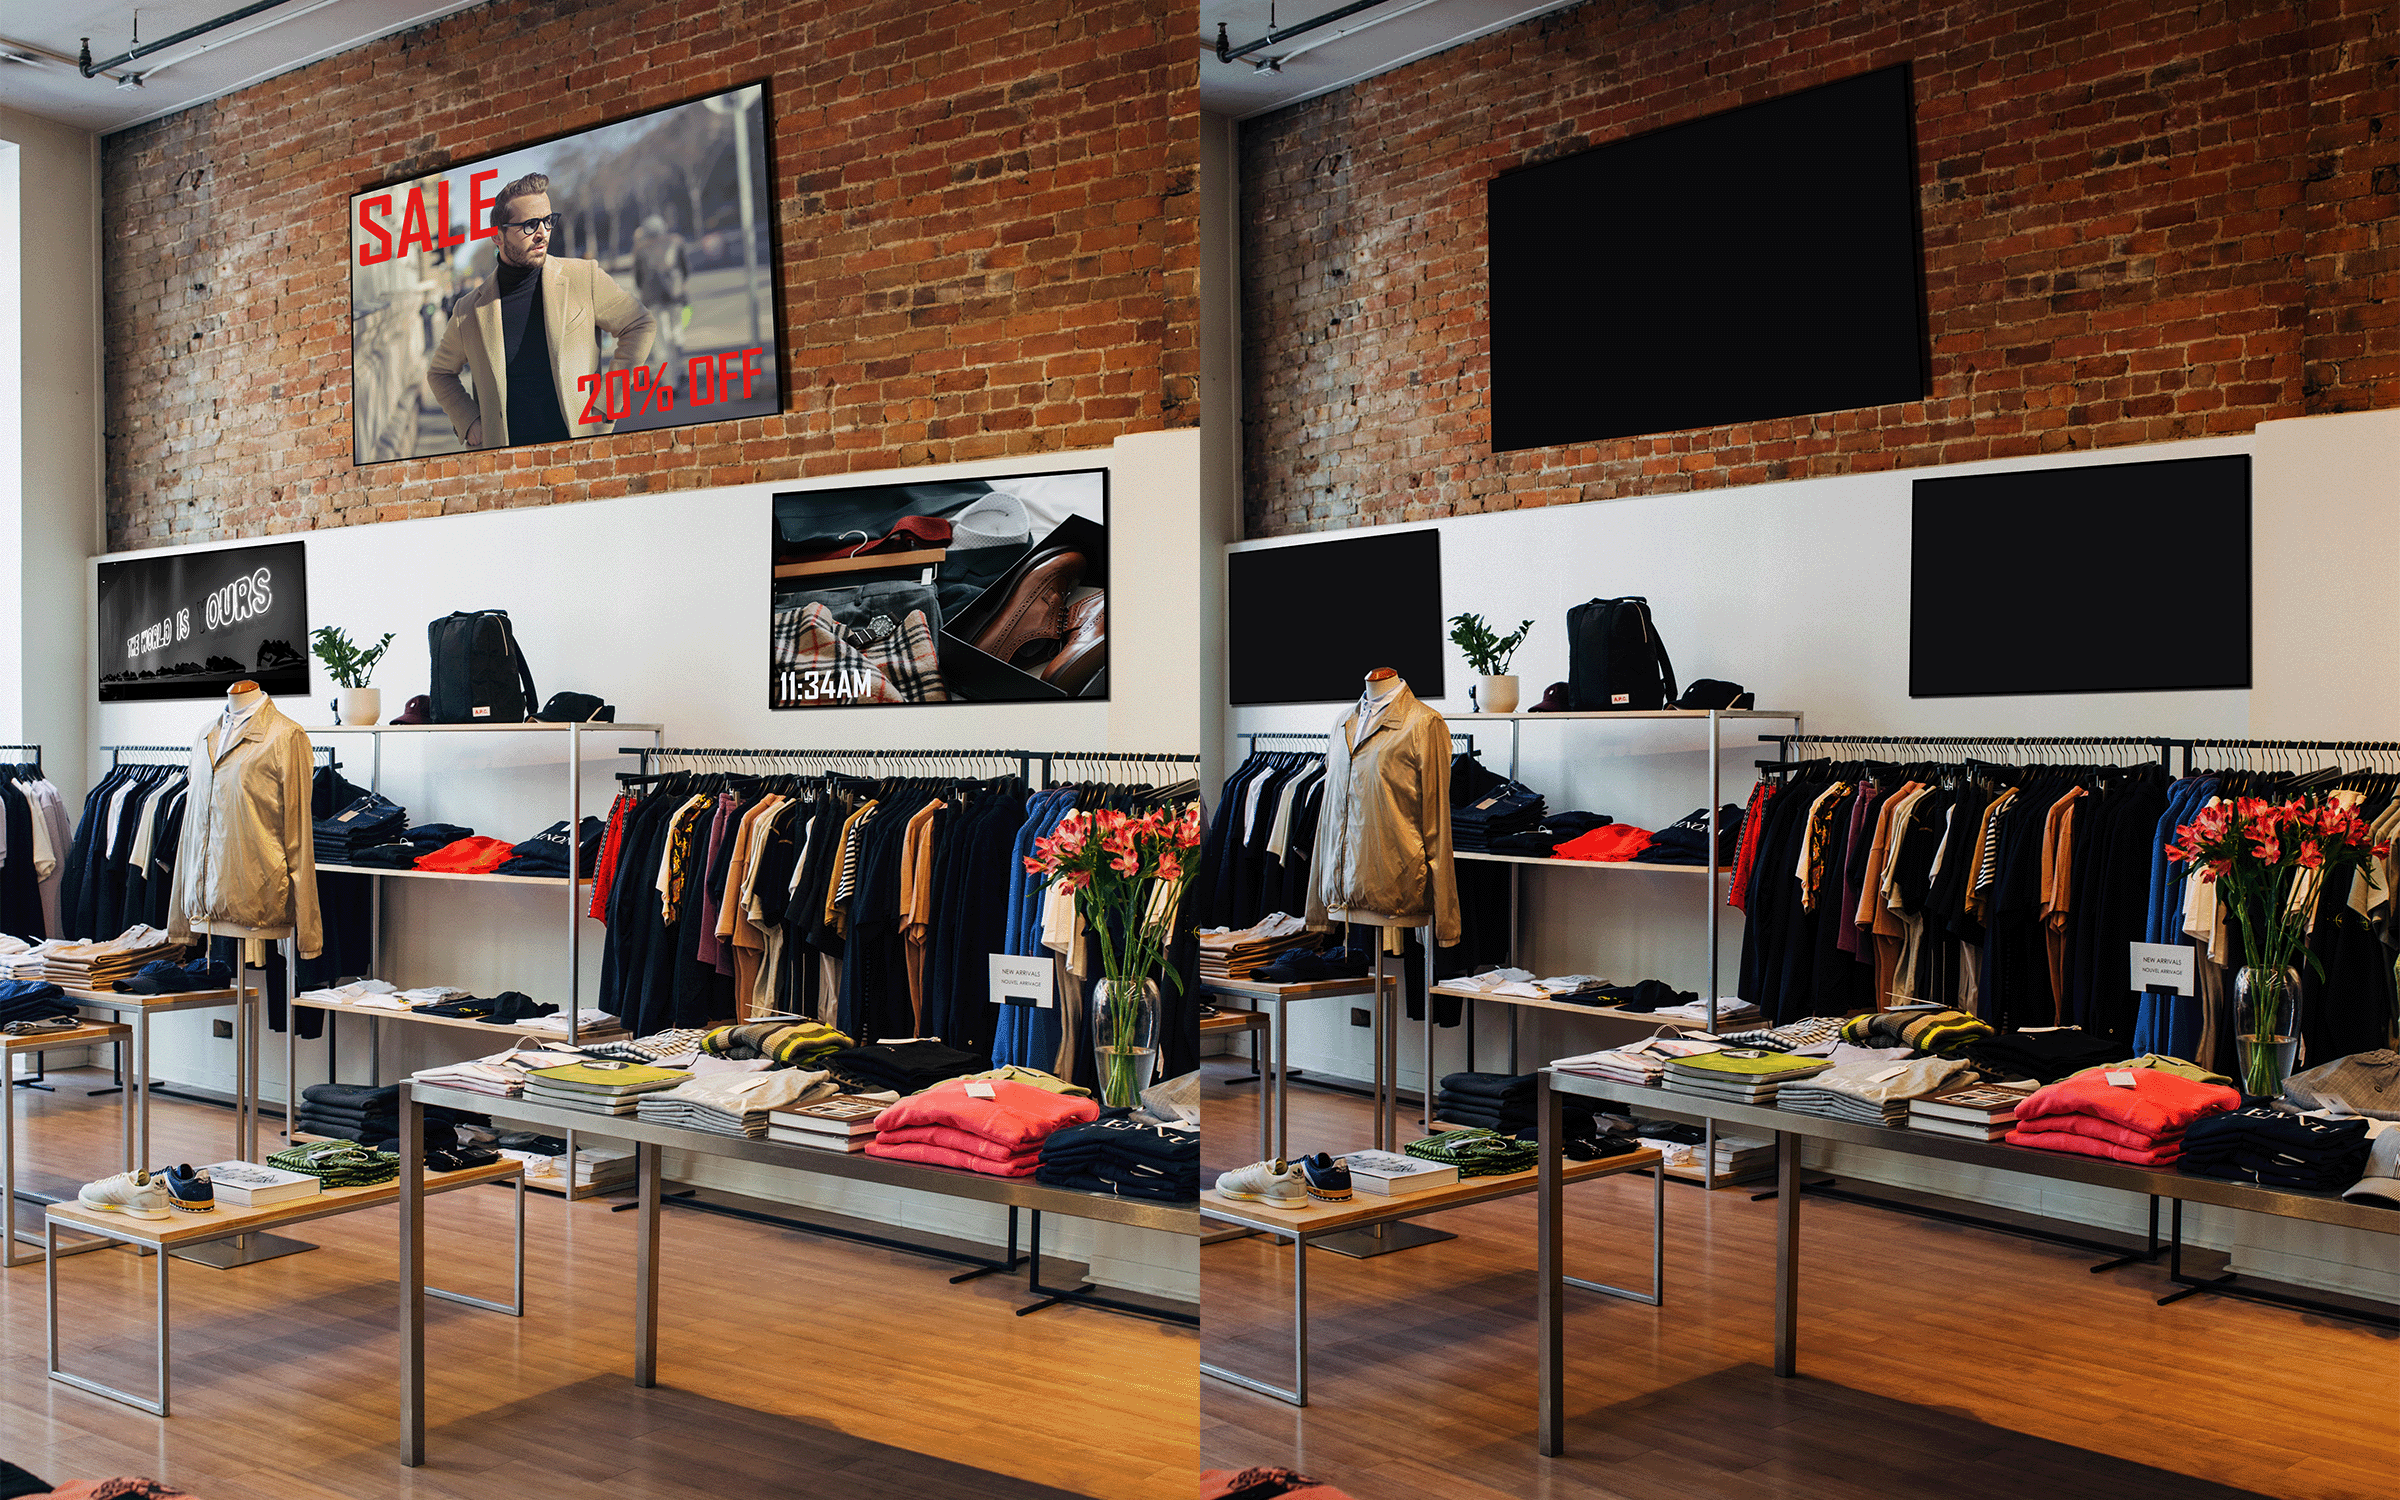 A retail space with clothing hanging up on racks and folded on tables with three commercial LCD displays on the walls. There are Two images side by side that are the same except one has the displays turned on and one has the displays turned off.